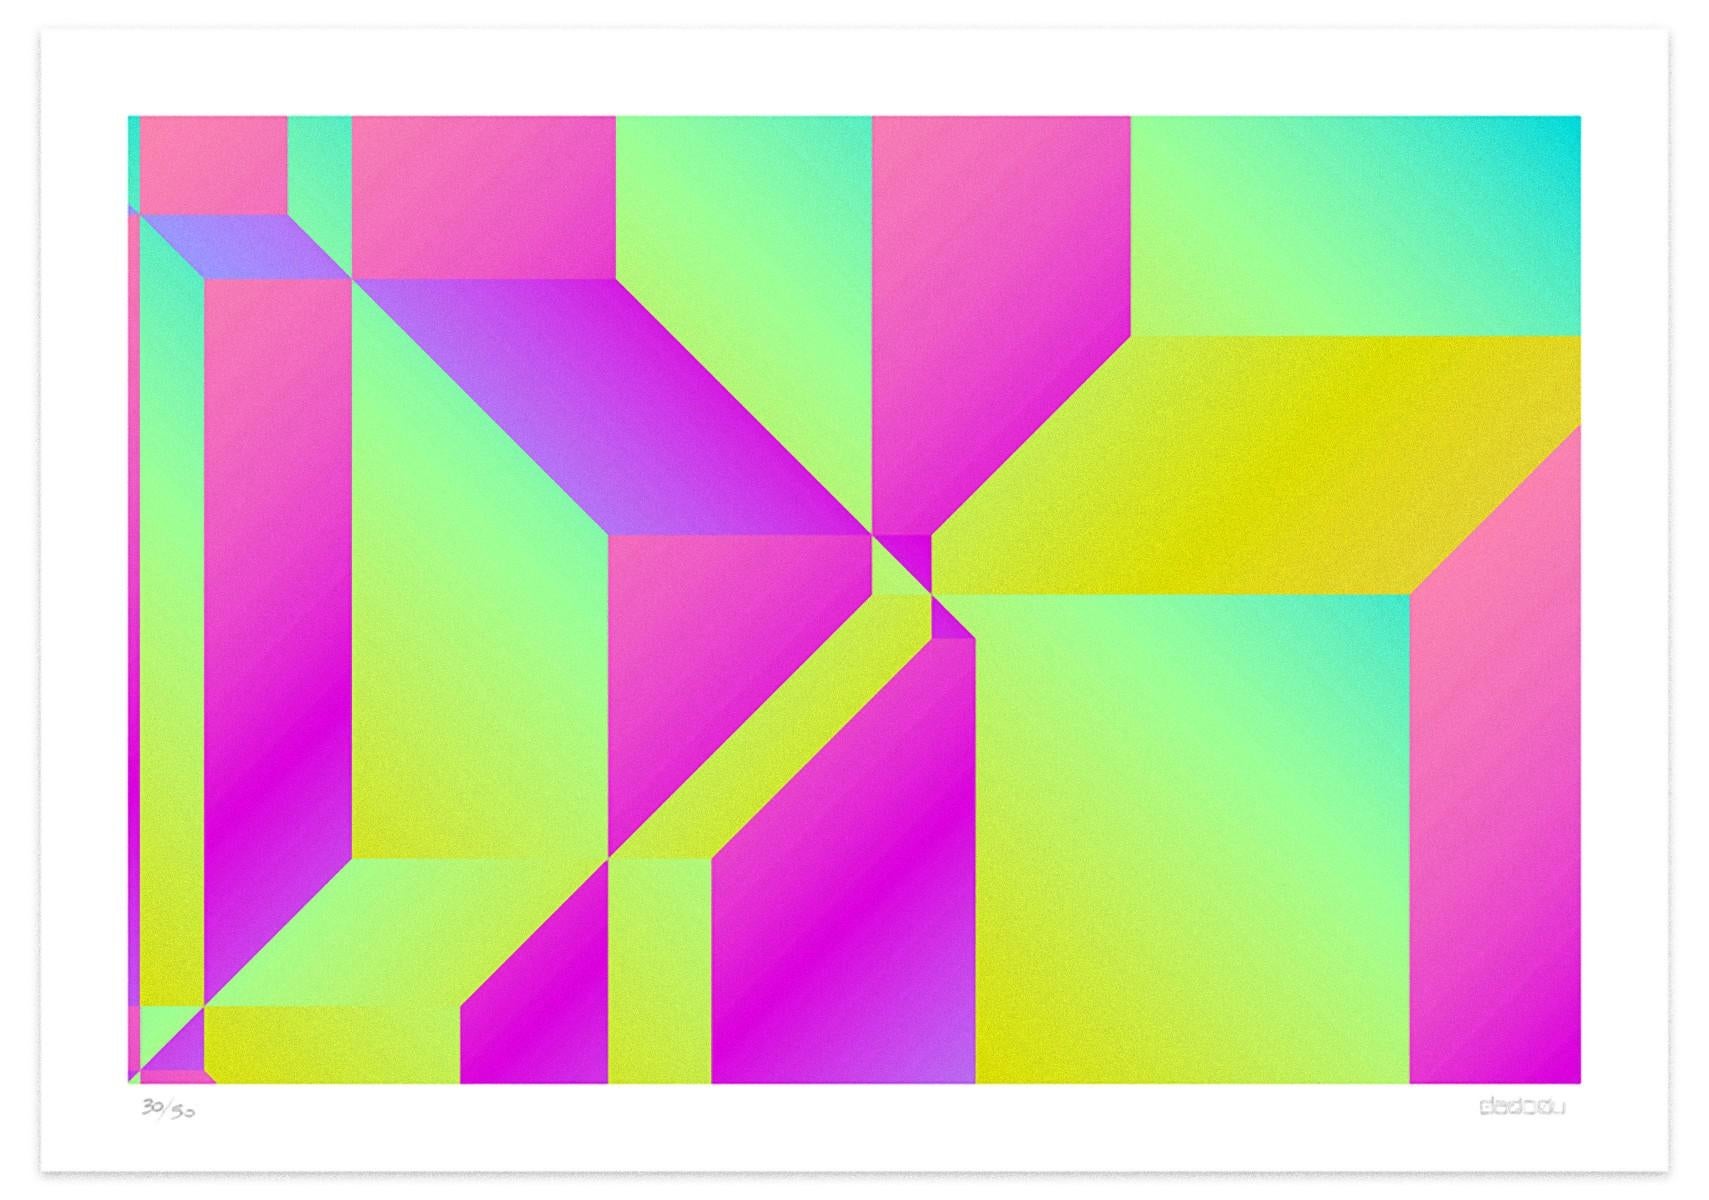 Moving Walls  is a colorful  giclée print realized by the contemporary artist  Dadodu in 2018.

This original artwork represents an overlap of soft curving shapes with green and fuchsia hues.

Hand-signed on the lower right corner "Dadodu" and